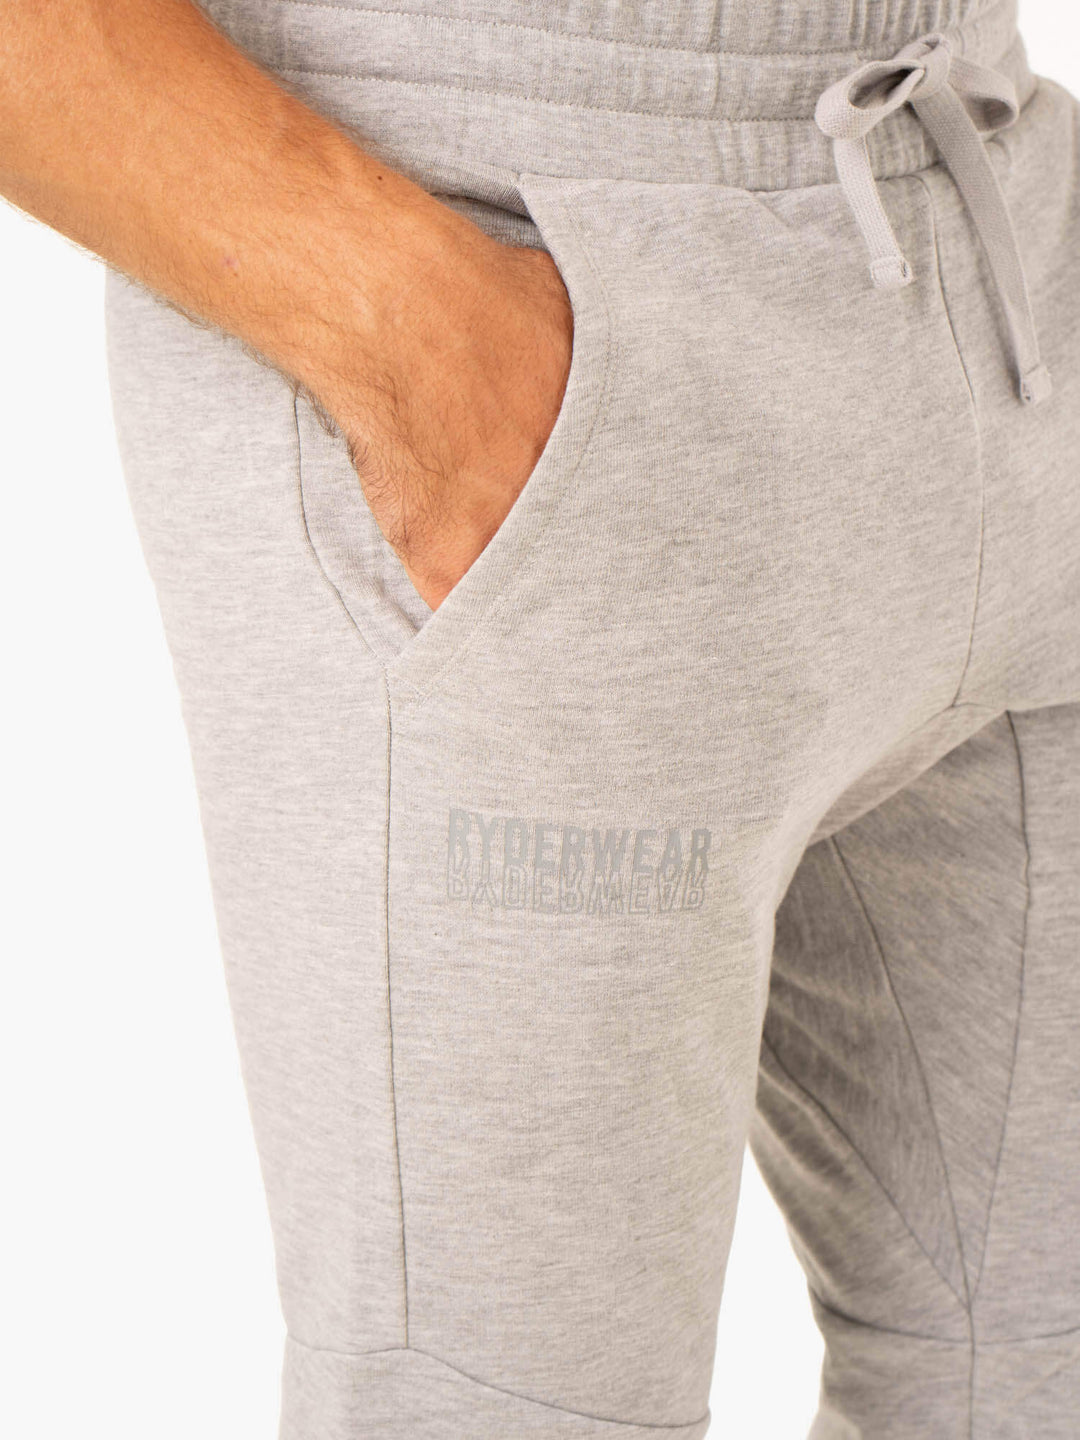 Limitless Track Pant - Grey Marl Clothing Ryderwear 